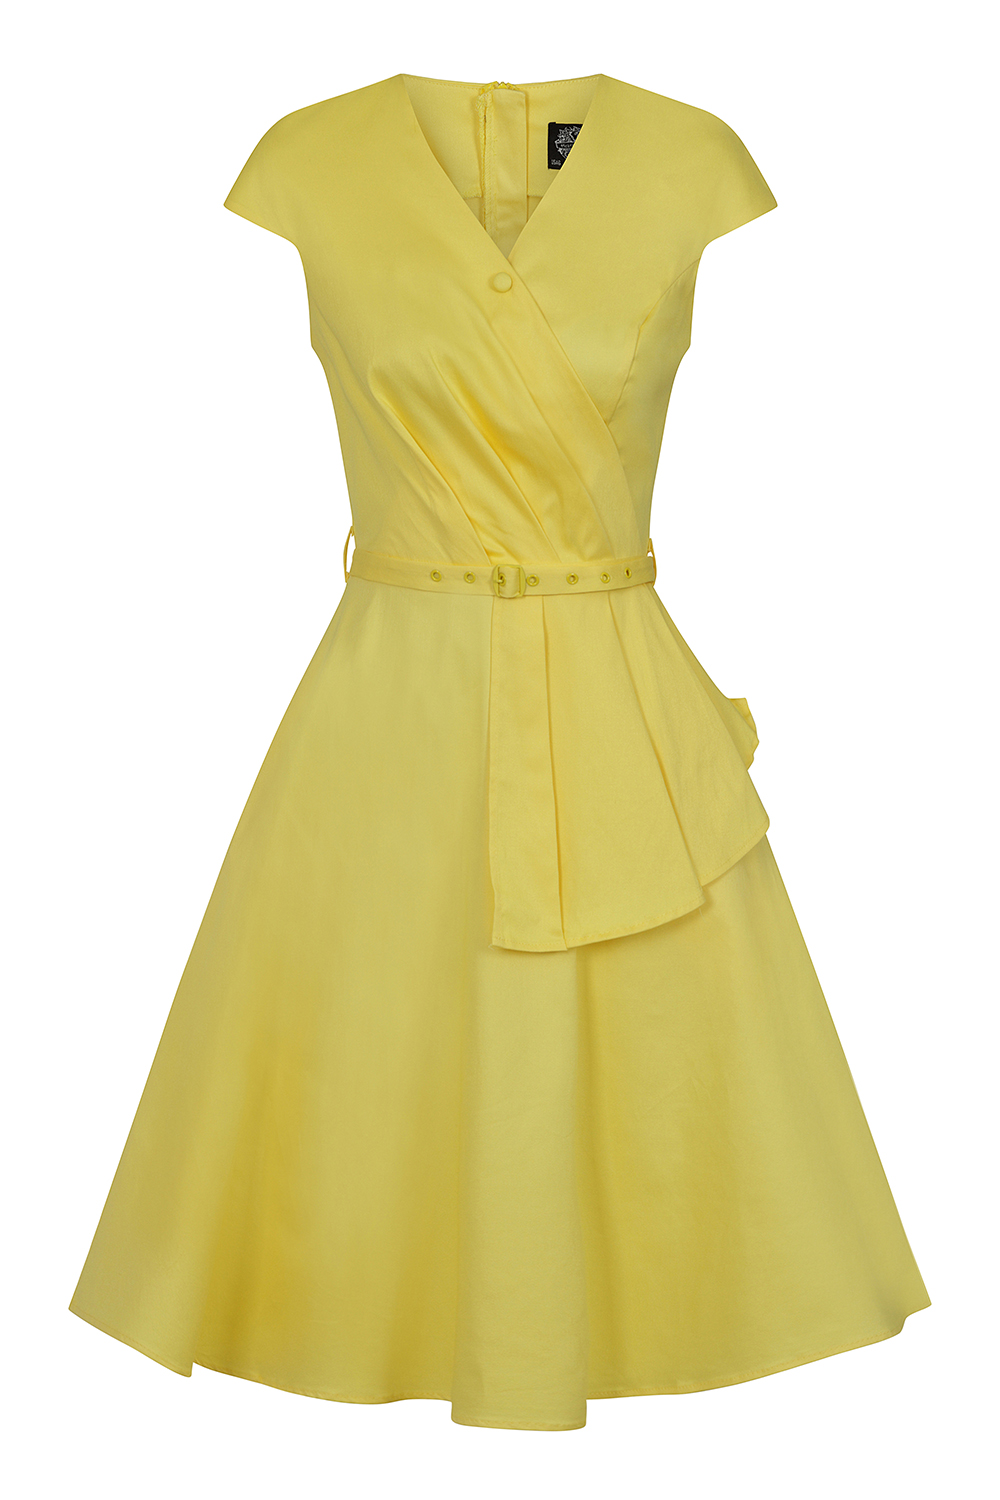 Elaine Summer Dress in Yellow - Hearts & Roses London